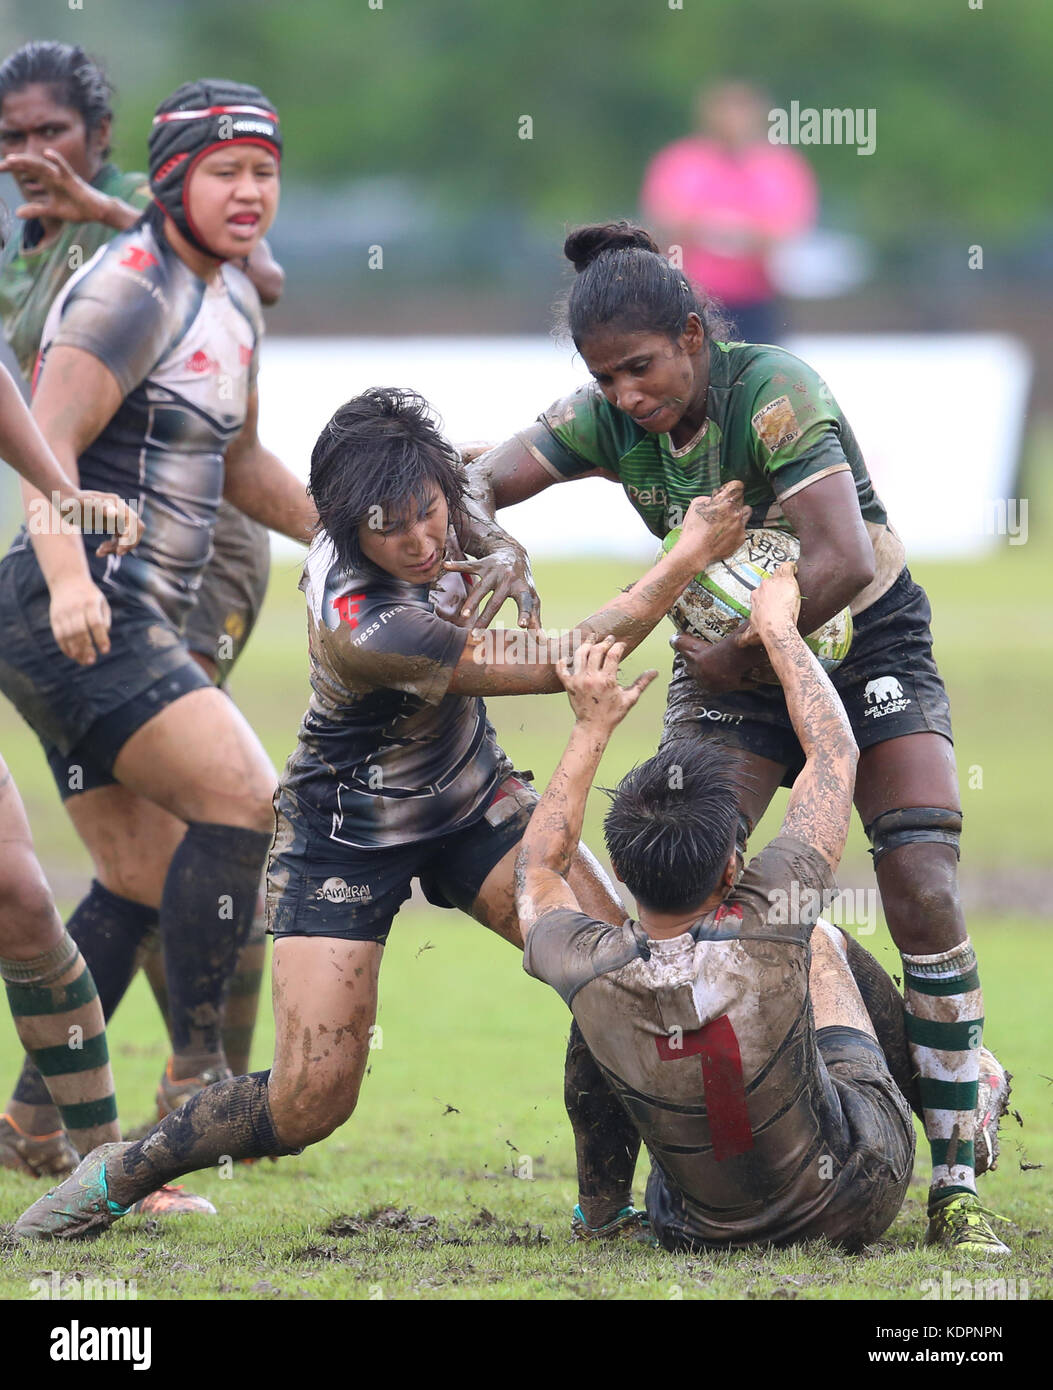 Colombo, Sri Lanka. 15th Oct, 2017. Player of Sri Lanka is tackled by Player,s of  Singapore during the Asia Rugby Women's Sevens 2017 match between Sri Lanka and Singapore at Race Course Ground on 15 October 2017 in Colombo, Sri Lanka.  Credit: Lahiru Harshana/Alamy Live News Stock Photo